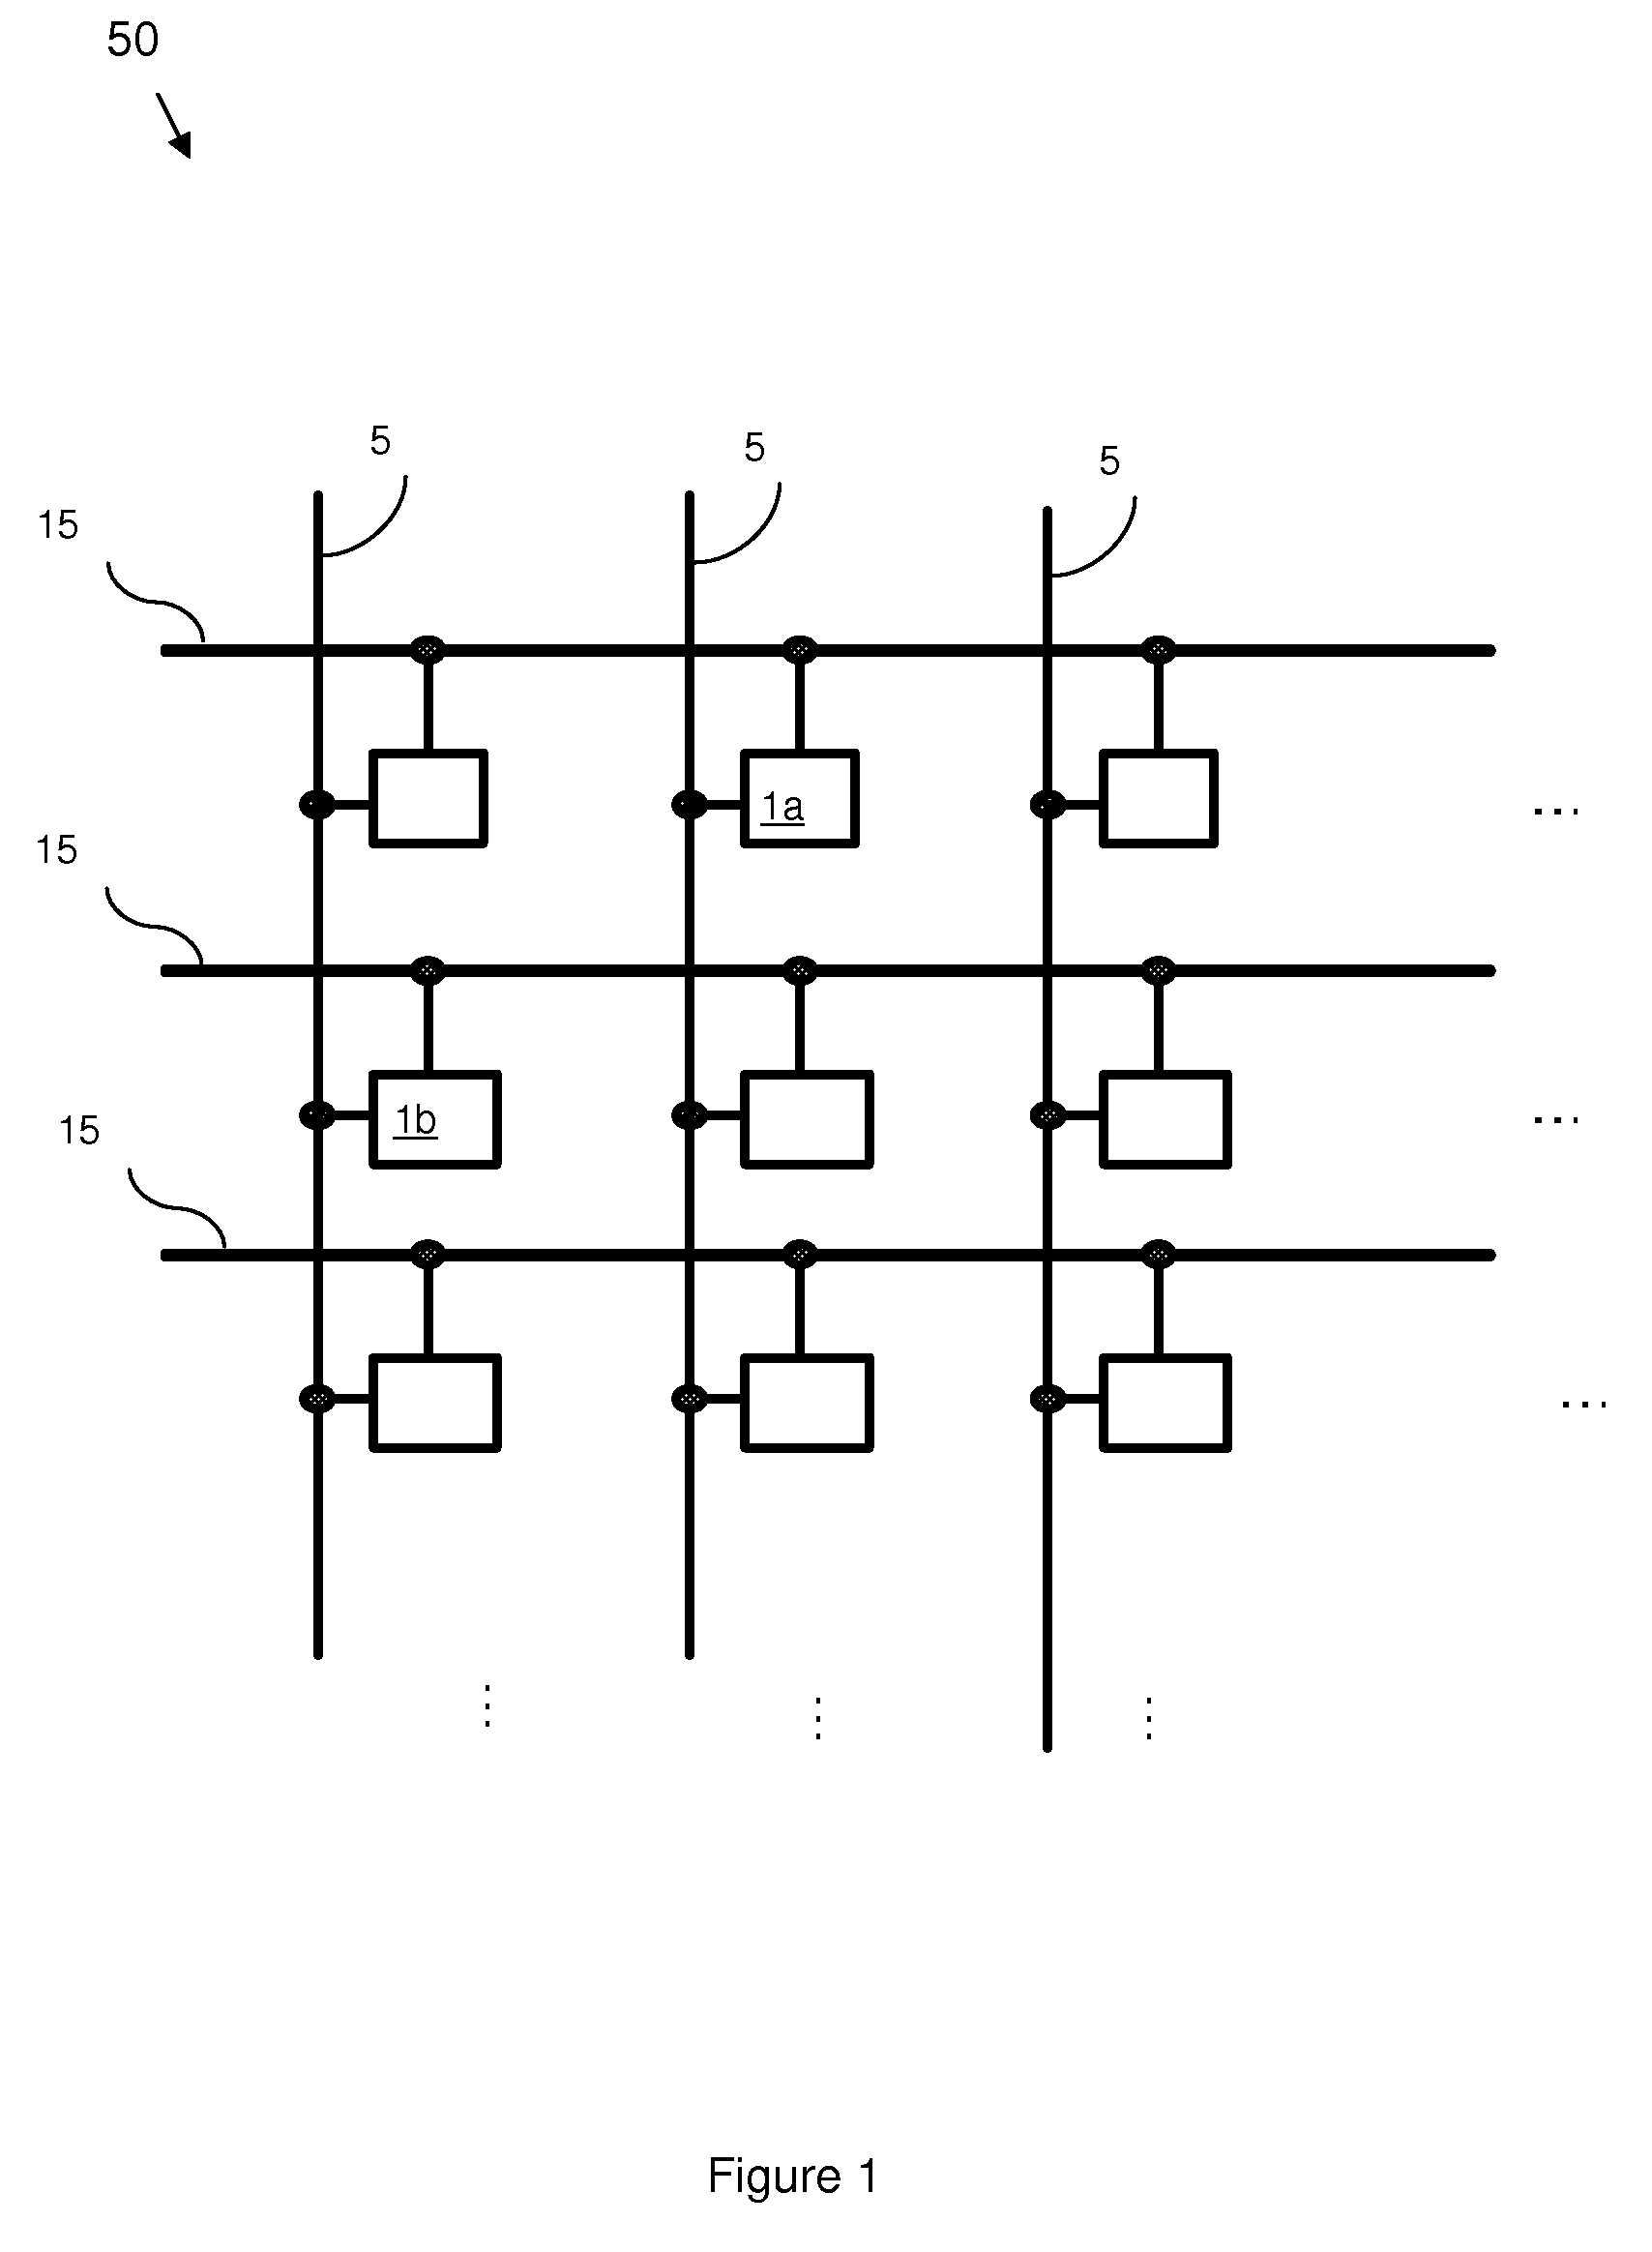 Balanced and bi-directional bit line paths for memory arrays with programmable memory cells